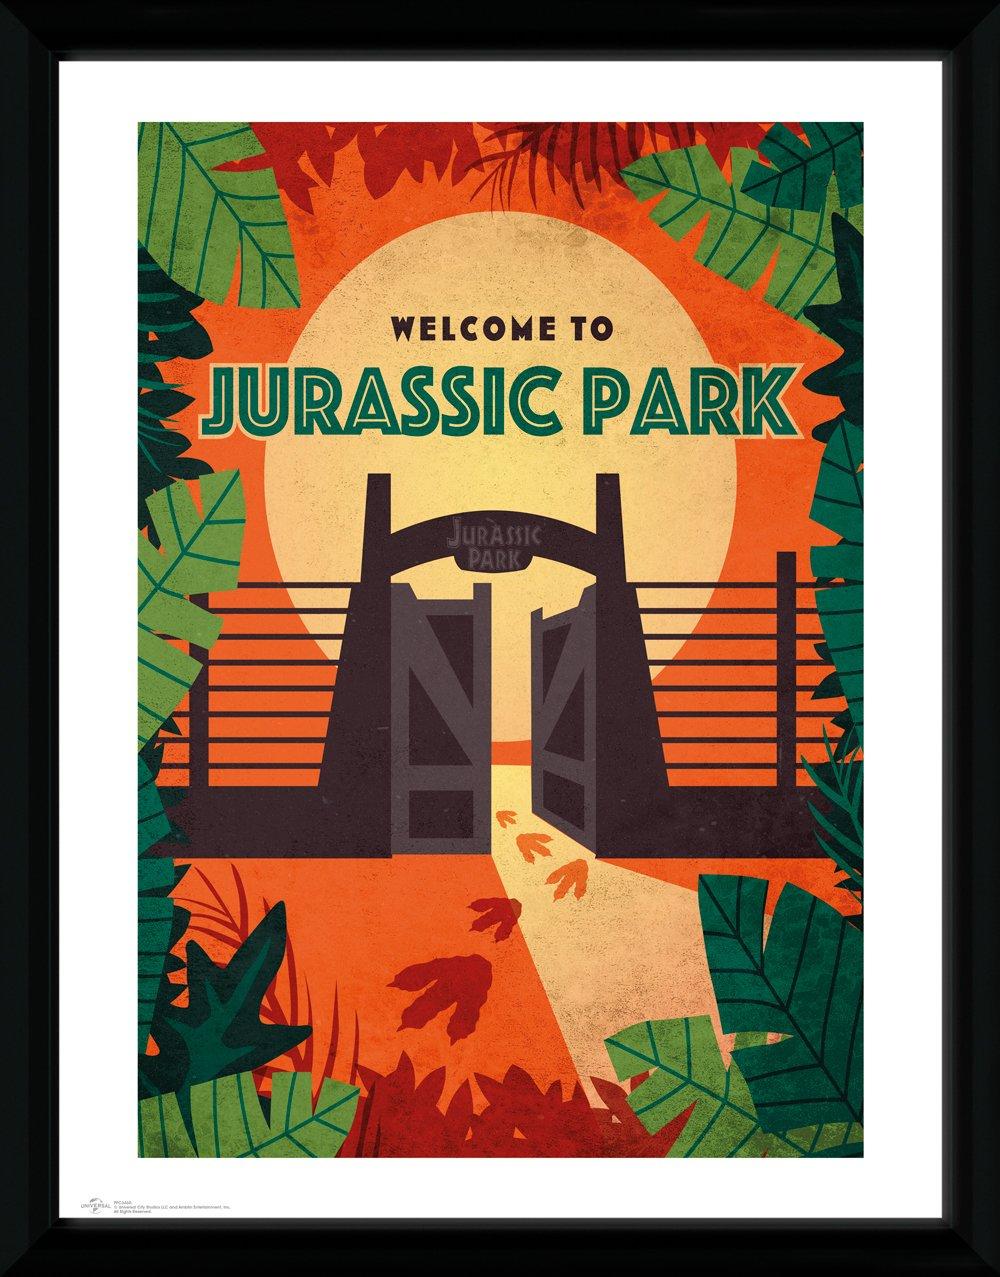 JURASSIC PARK - COLLECTOR PRINT 30X40 - WELCOME